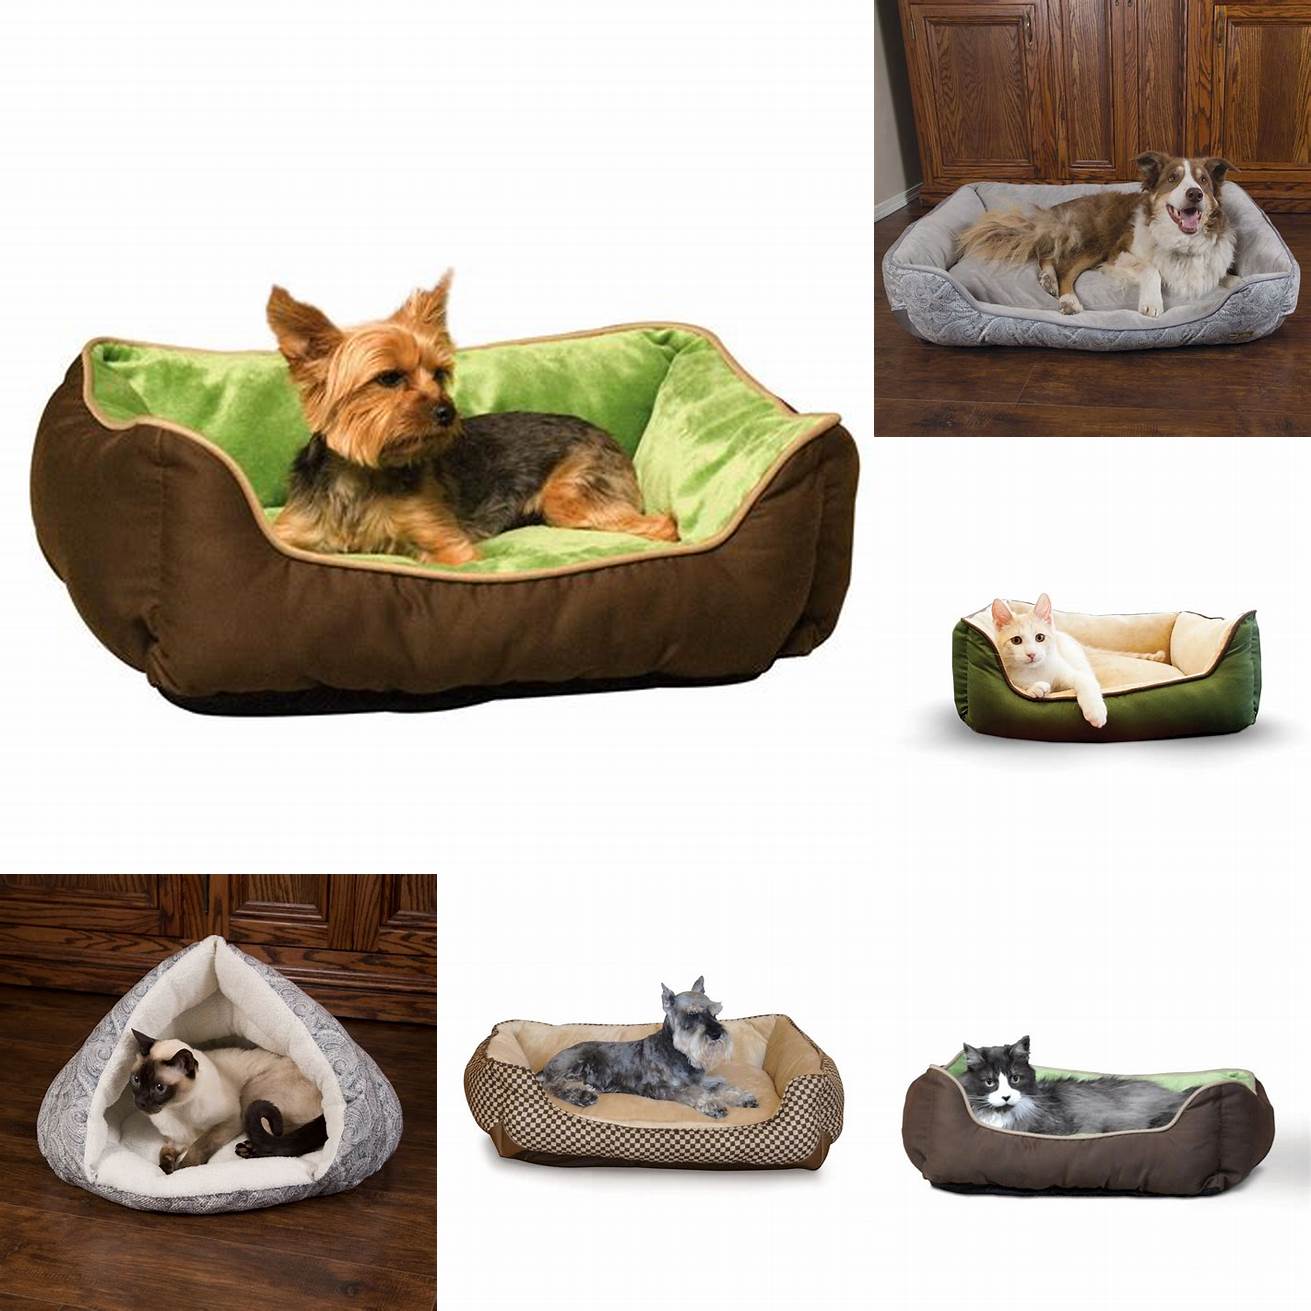 3 Best for Warmth The KH Pet Products Self-Warming Lounge Sleeper